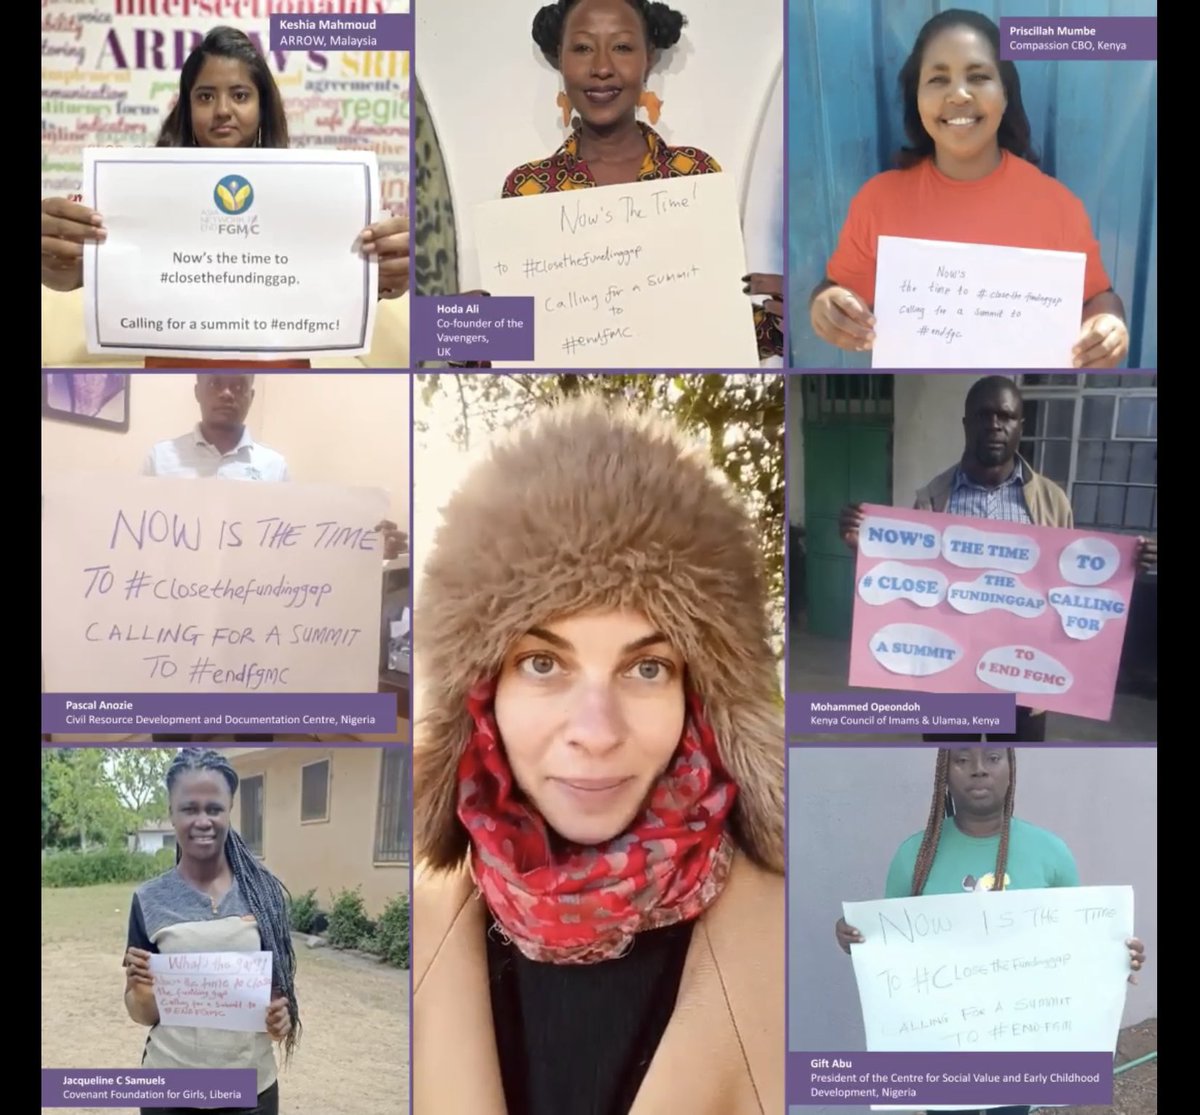 How much is needed to #CloseTheFundingGap? Why are we calling for a summit to #EndFGMC? Join us, leading activists, and @NatTenaLady tomorrow on #ZeroToleranceDay to find out more…@TheGirlGen @AM28toomany @covaw @endfgmcasia @ARROW_Women @UN_Women